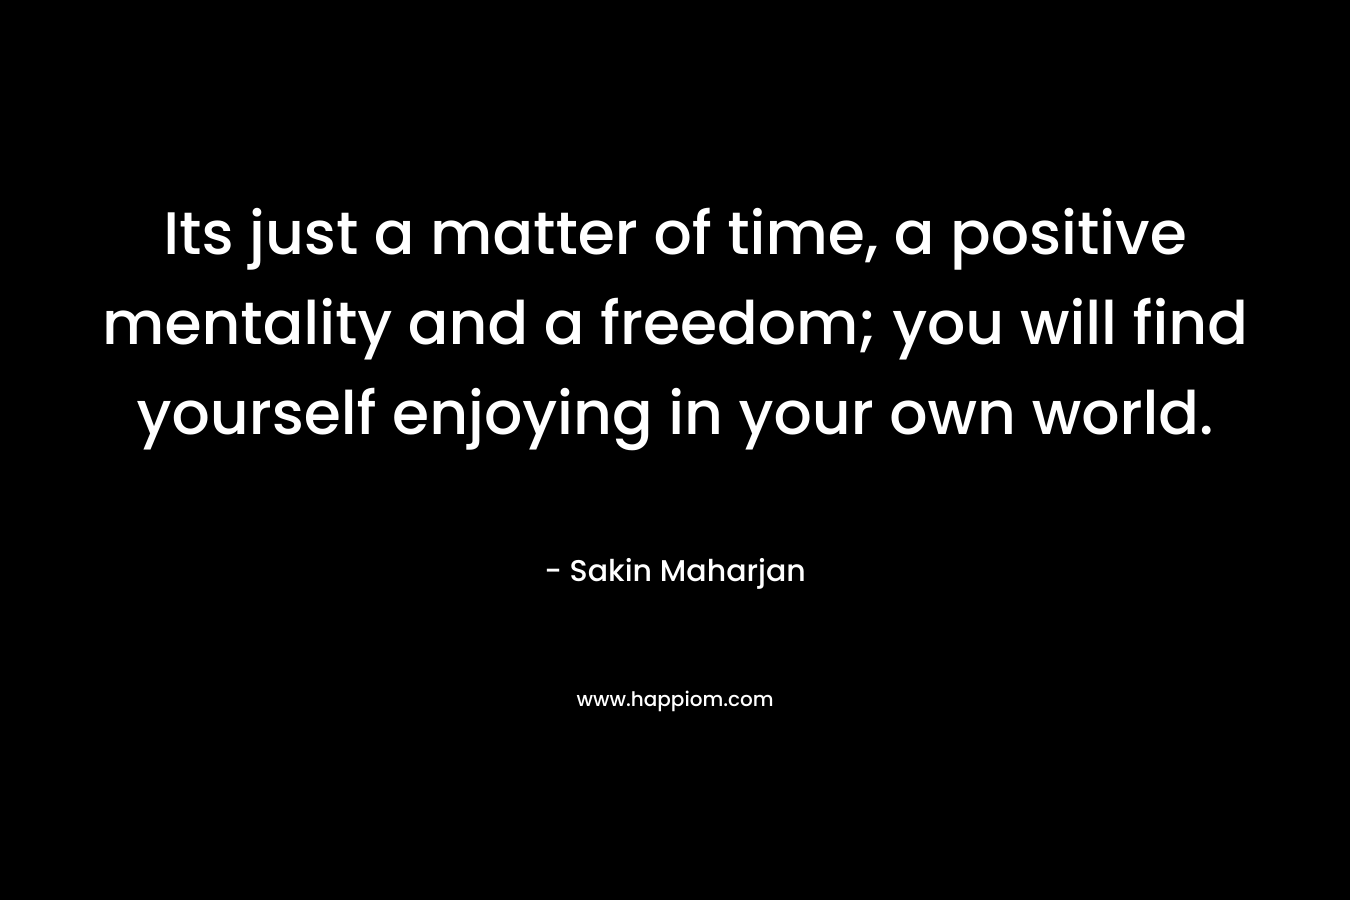 Its just a matter of time, a positive mentality and a freedom; you will find yourself enjoying in your own world.